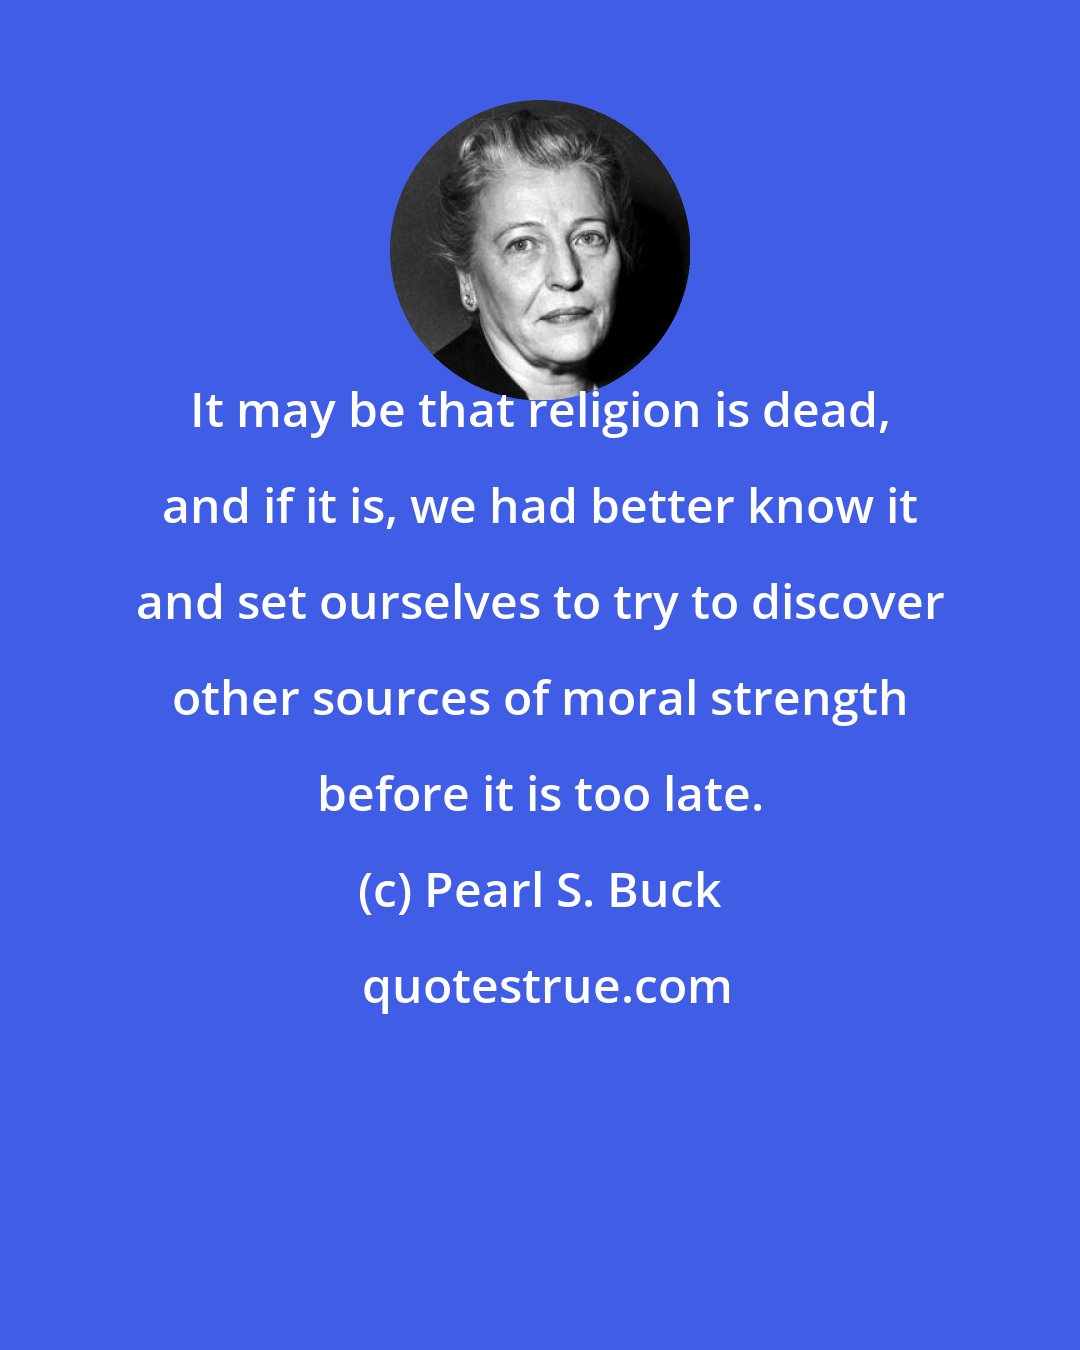 Pearl S. Buck: It may be that religion is dead, and if it is, we had better know it and set ourselves to try to discover other sources of moral strength before it is too late.